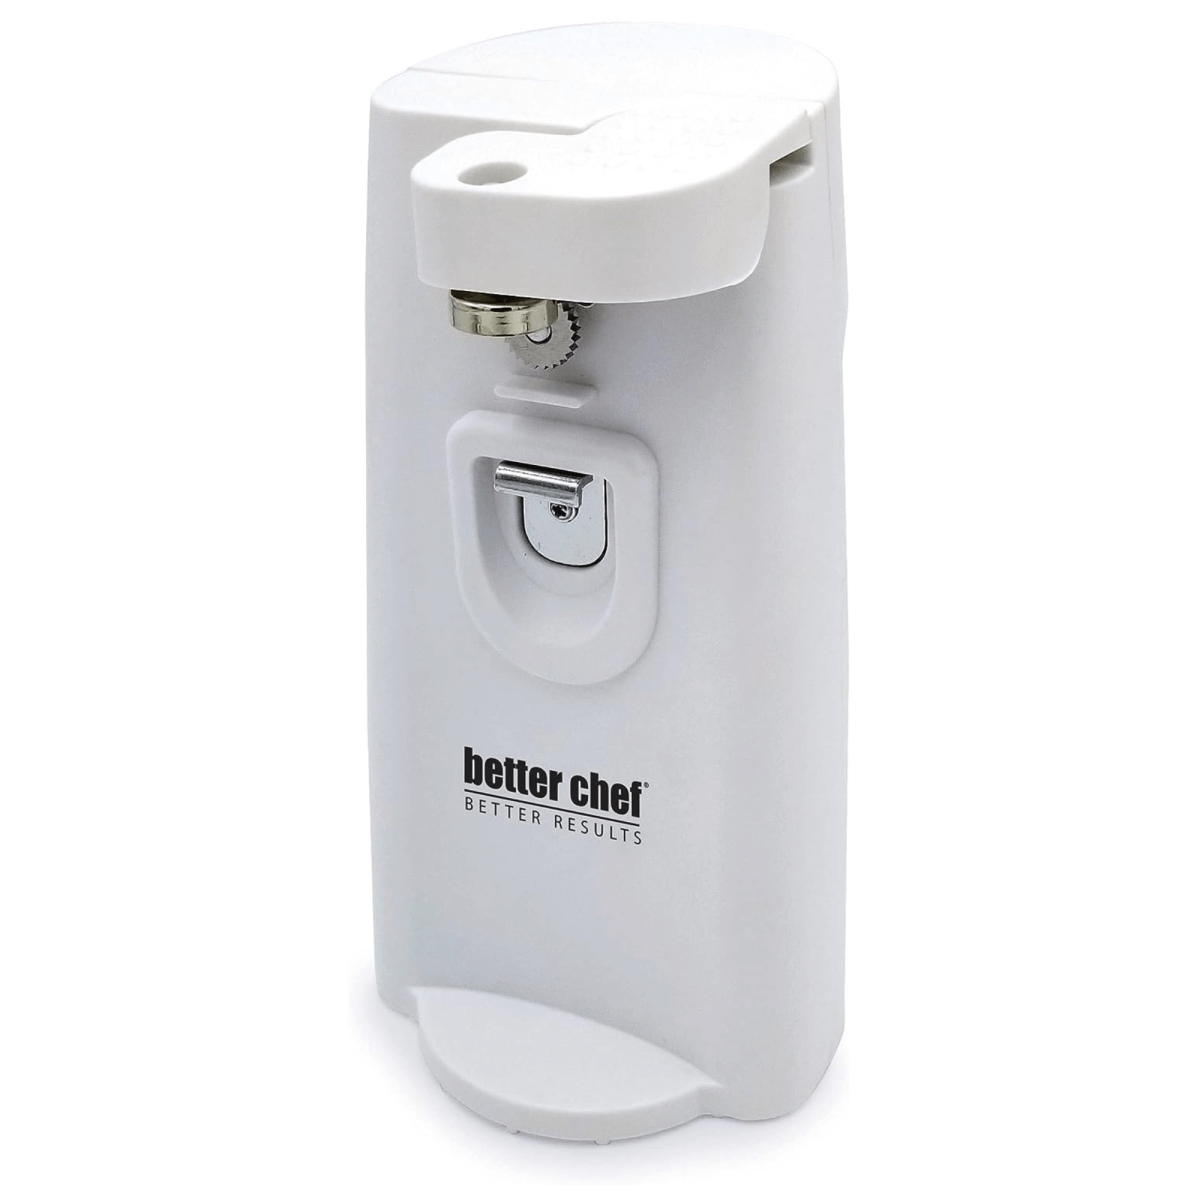 Better Chef IM-838W-CAN-CP Better Chef Deluxe Tall 3-in-1 Electric Can Opener - White